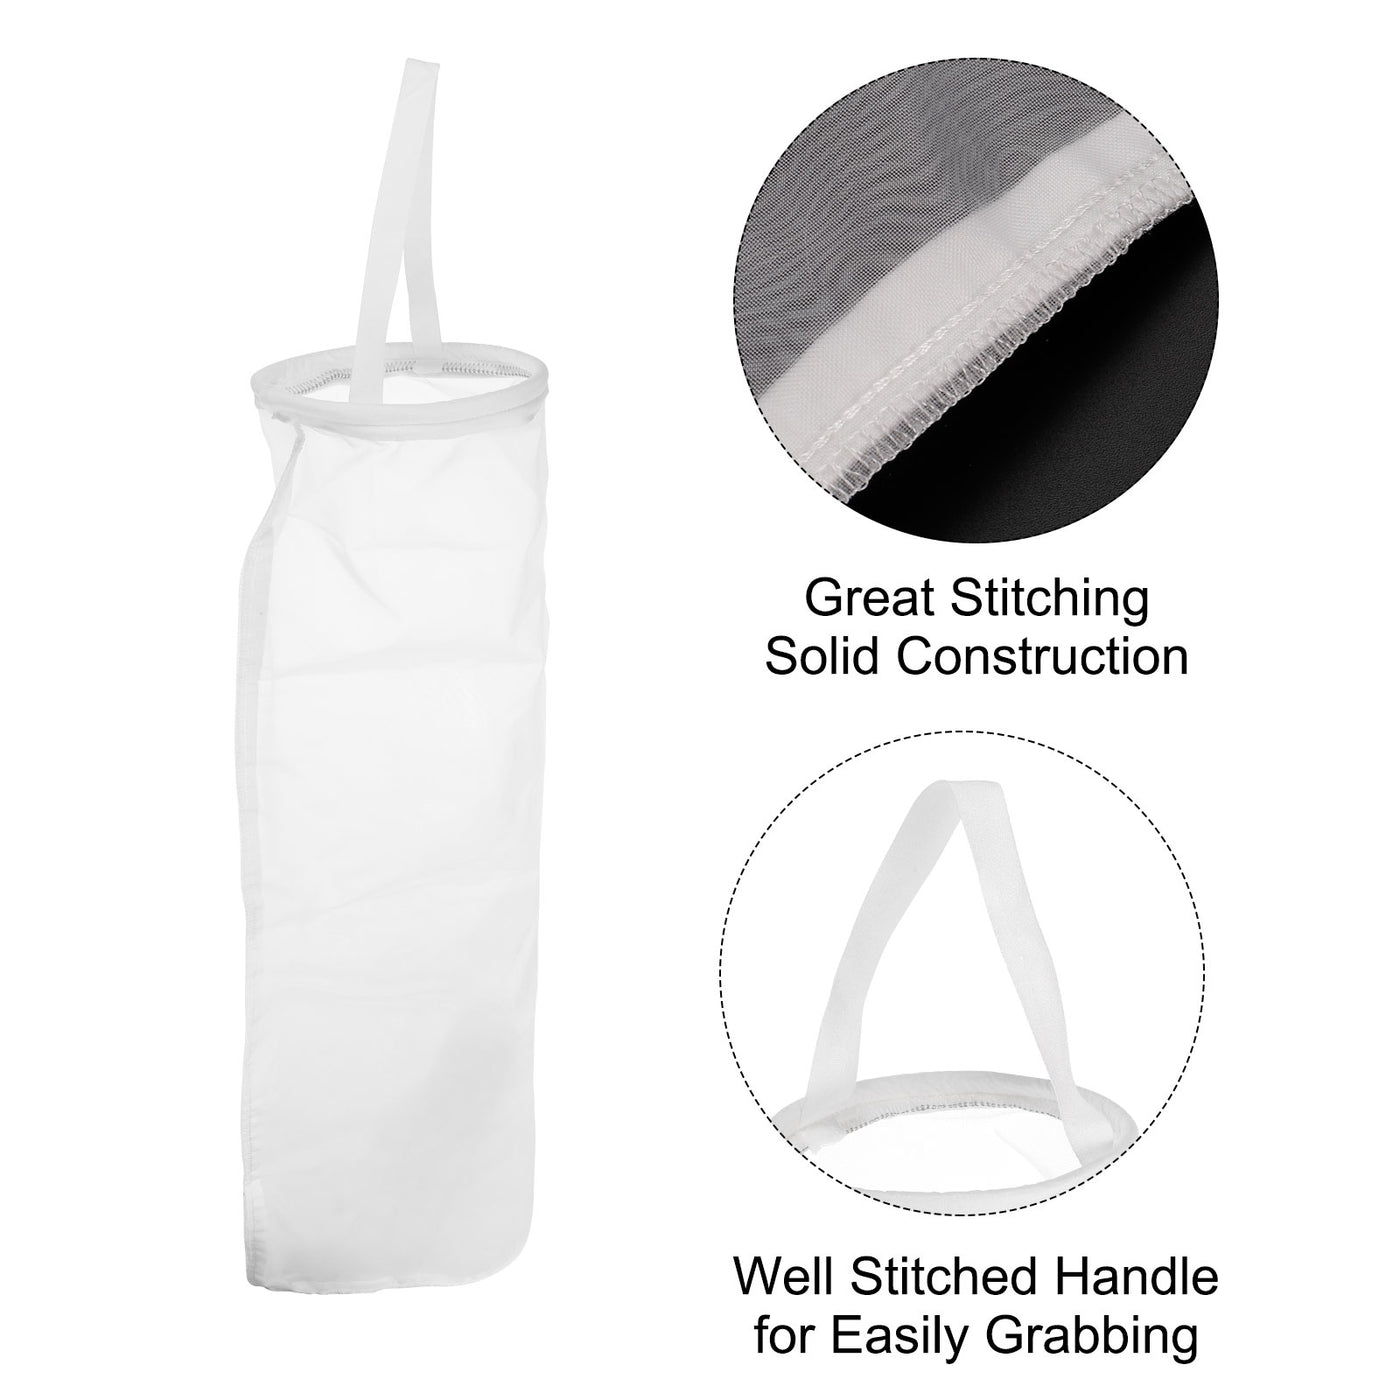 uxcell Uxcell Paint Filter Bag 50 Mesh (31.9"x7") Nylon Strainer for Filtering Paint